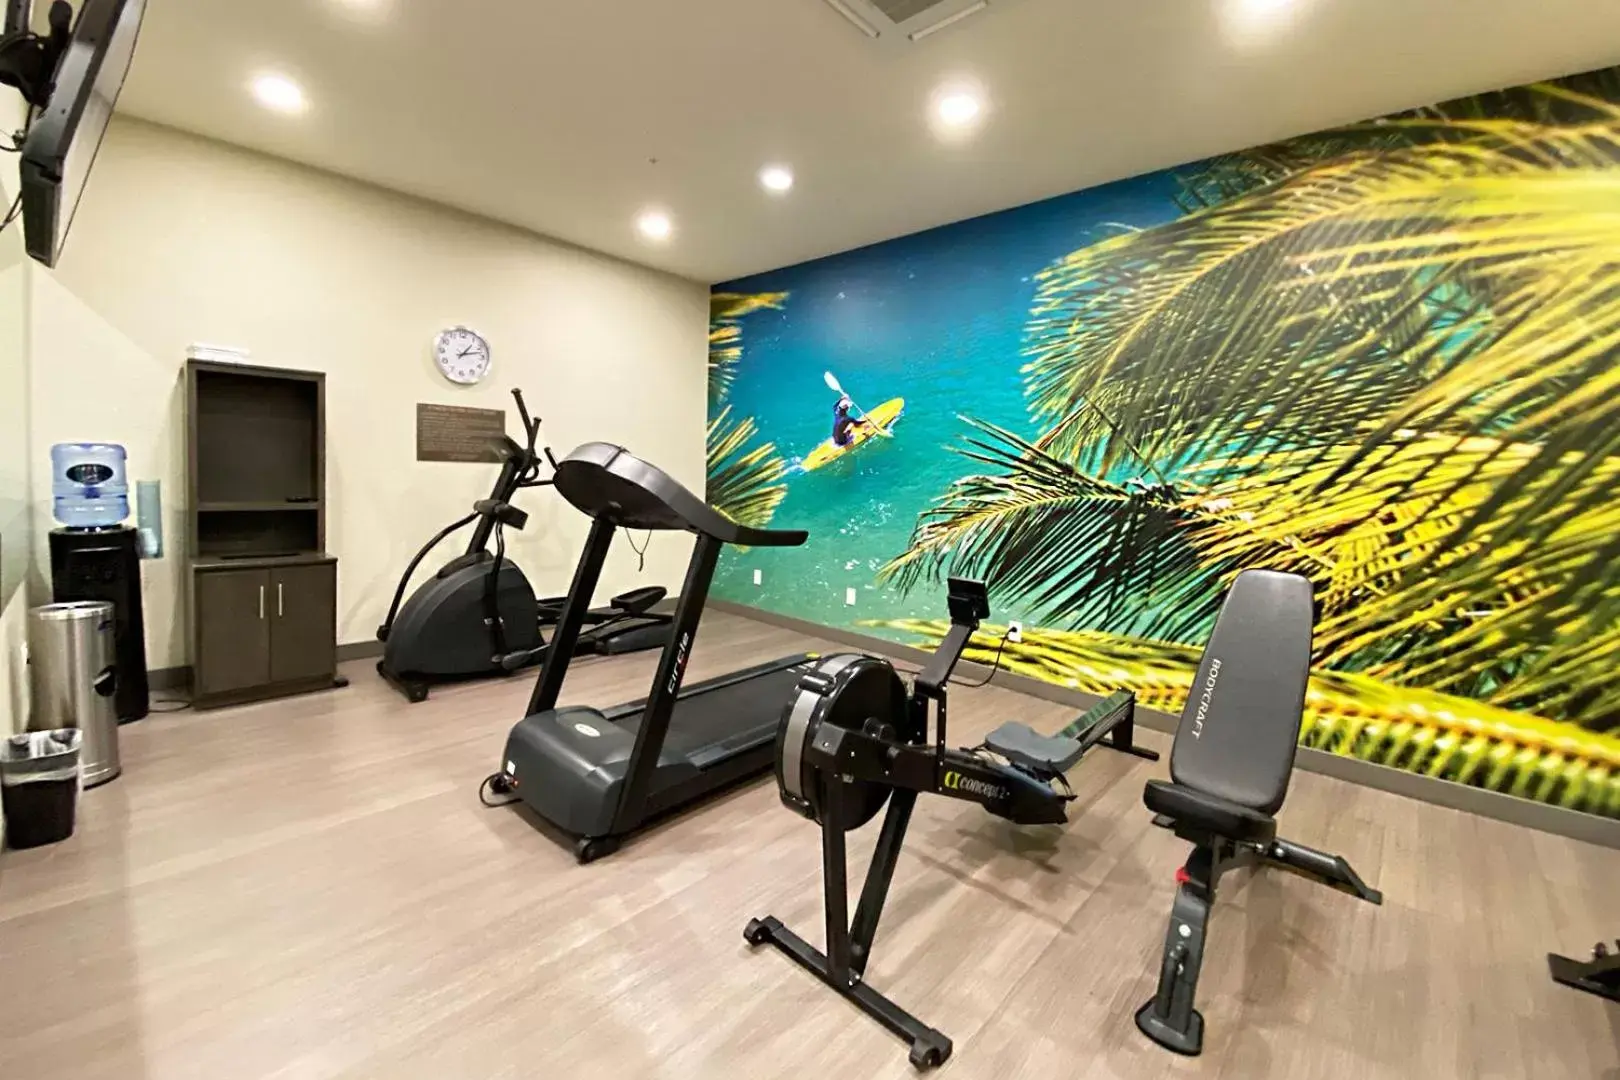 Fitness centre/facilities, Fitness Center/Facilities in Ameniti Bay - Best Western Signature Collection